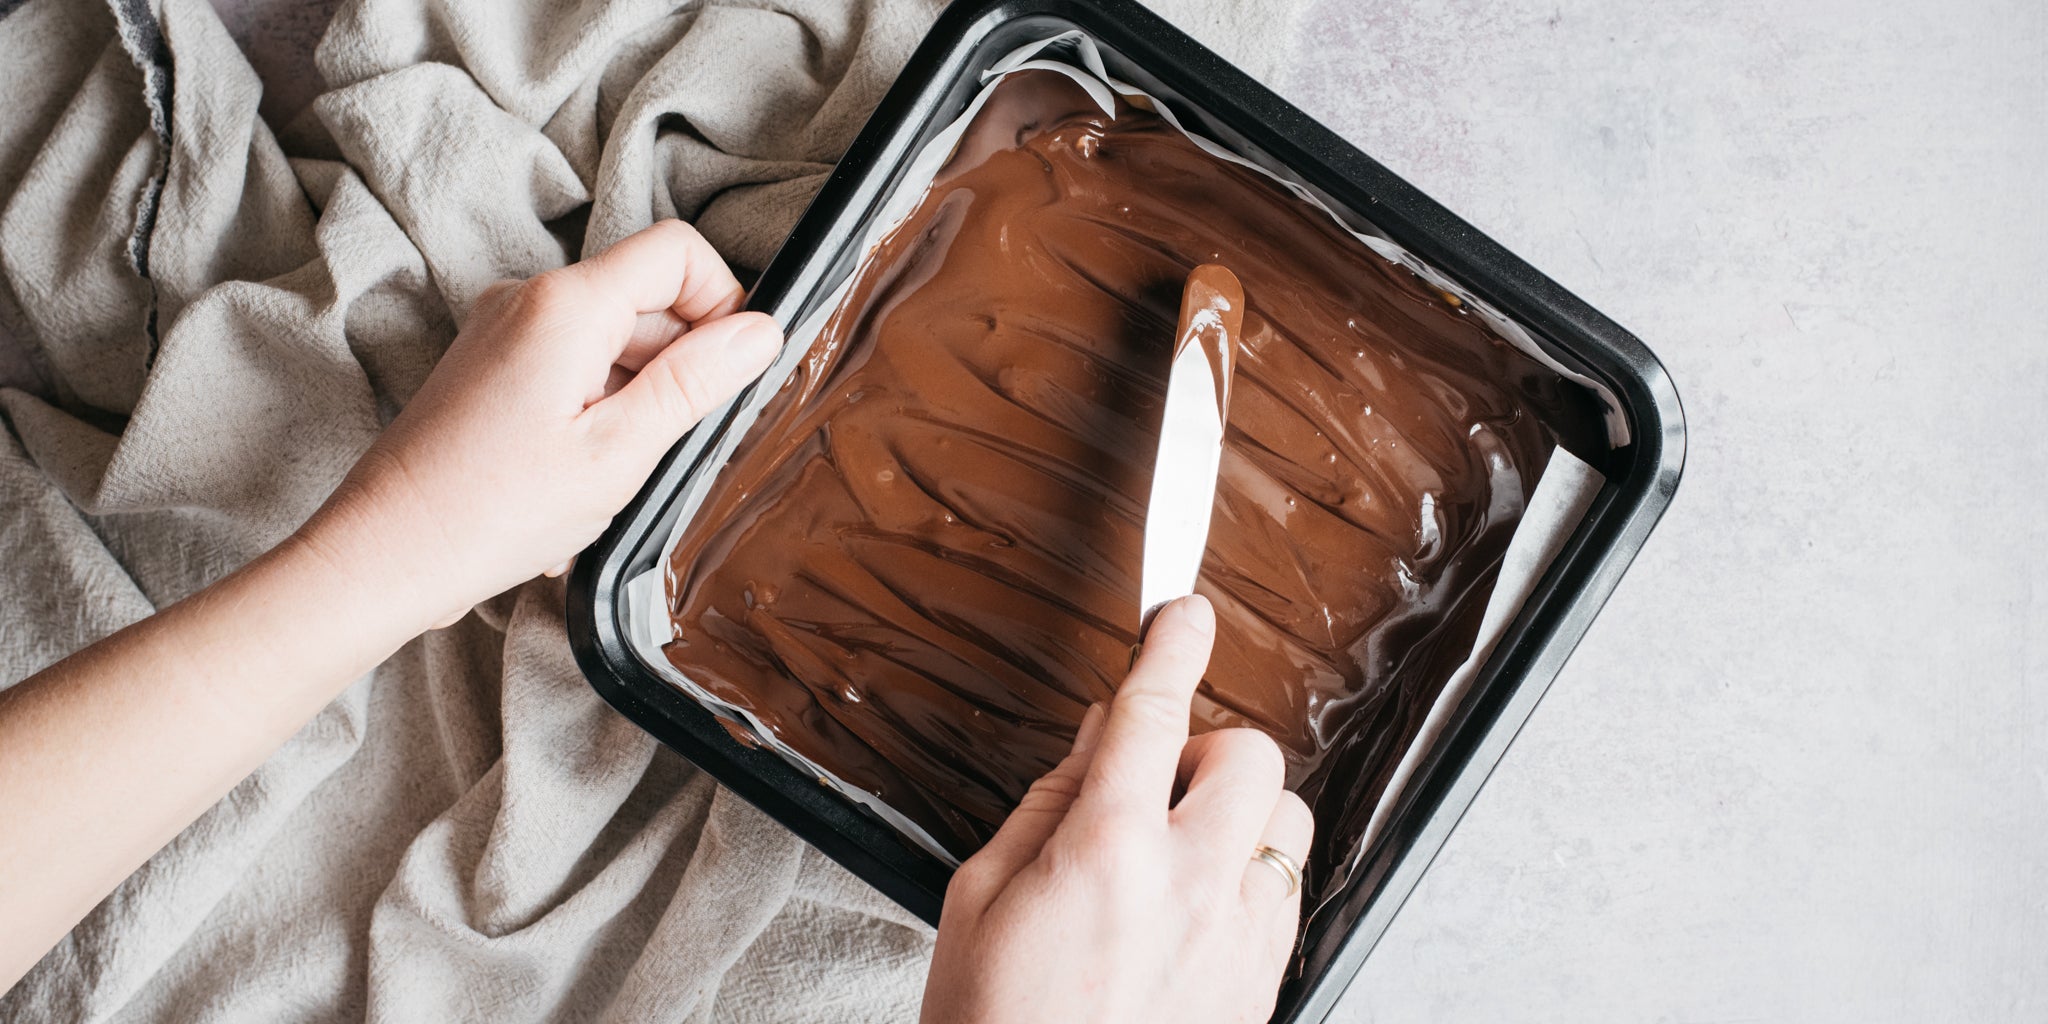 Melted chocolate being spread on top of a cake in a baking tin